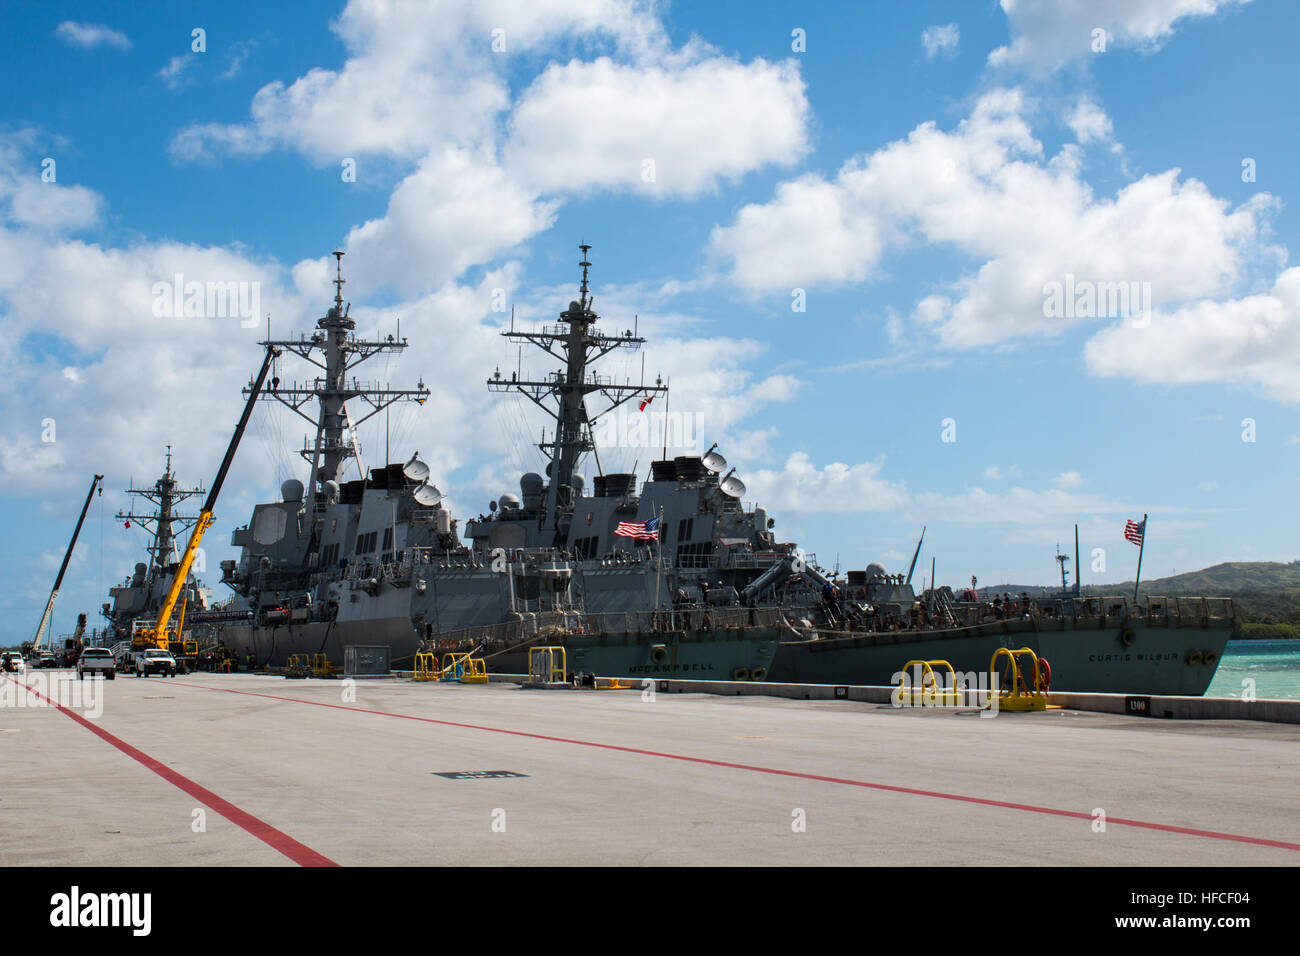 APRA HARBOR, Guam (March 4, 2016) – The destroyers USS McCampbell (DDG-85), Curtis Wilbur (DDG-54) and USS Benfold (DDG-65) take position next to one another on Sierra Wharf, Apra Harbor, U.S. Naval Base Guam for a short in-port period prior to the bilateral exercise Multi-Sail 2016 (MS-16).  Ten total naval surface combatants assigned to the U.S. and Japanese navies arrived in-port to Apra Harbor, increasing the total number of visiting and home-ported vessels at the base to 20 and marked the largest contingent of vessels in Apra Harbor in more than 30 years. (Released/Jeff Landis, Major, USM Stock Photo